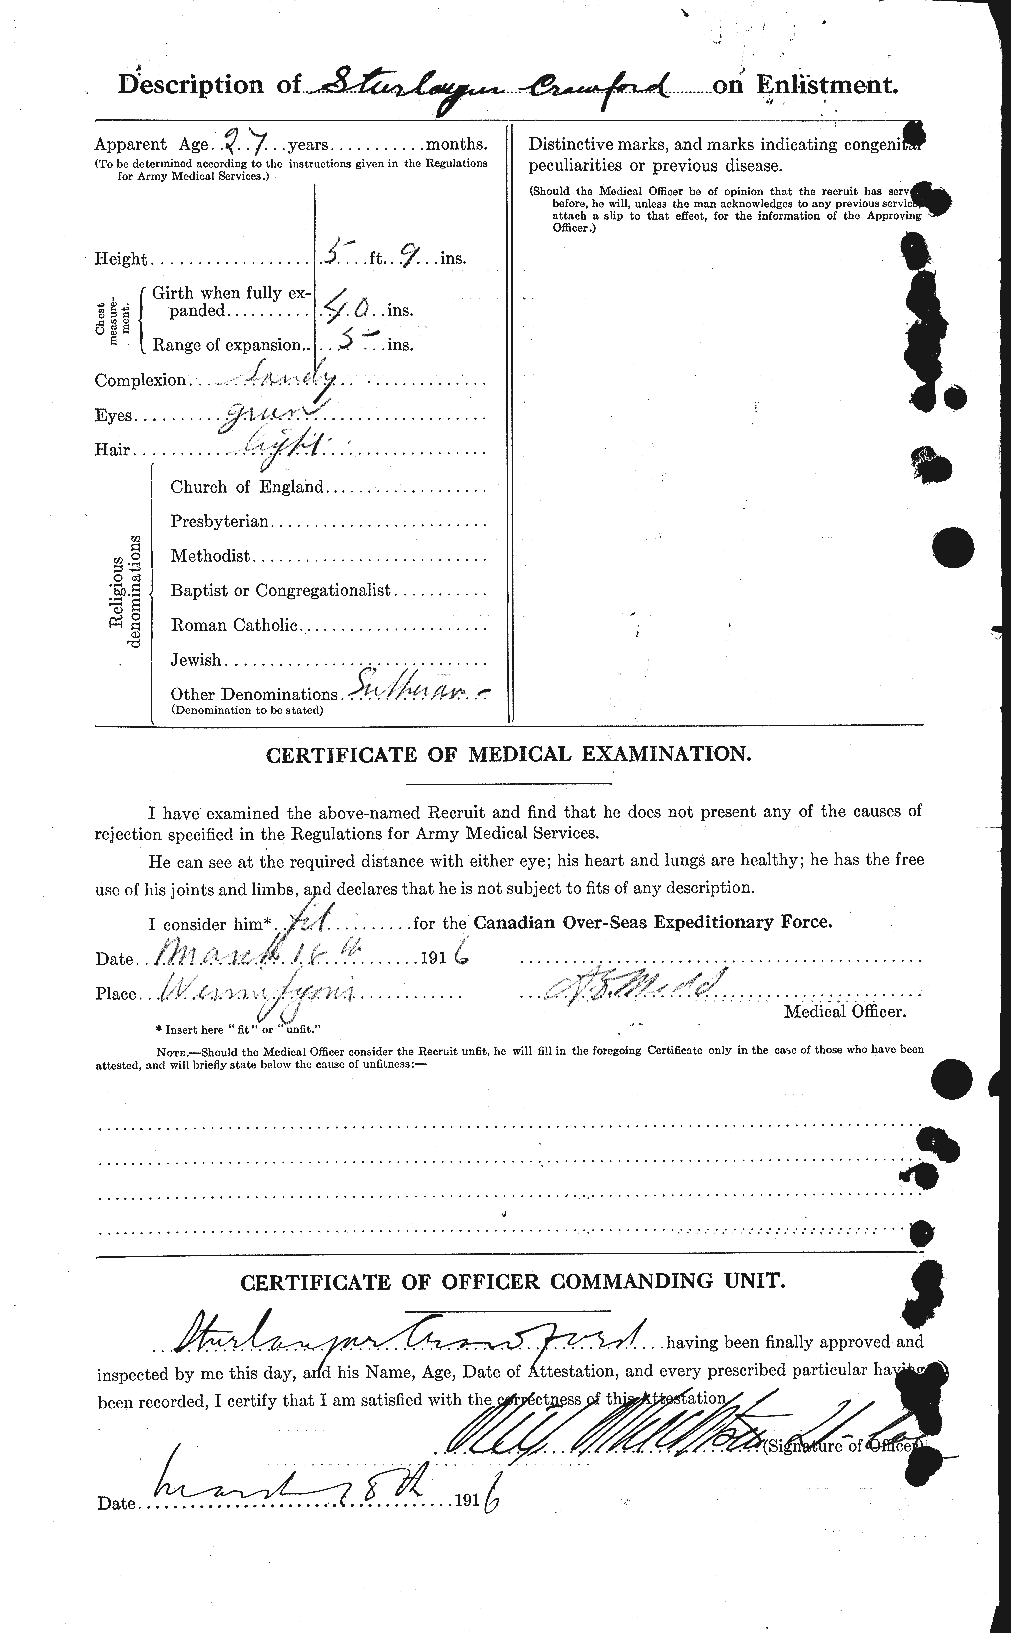 Personnel Records of the First World War - CEF 061368b